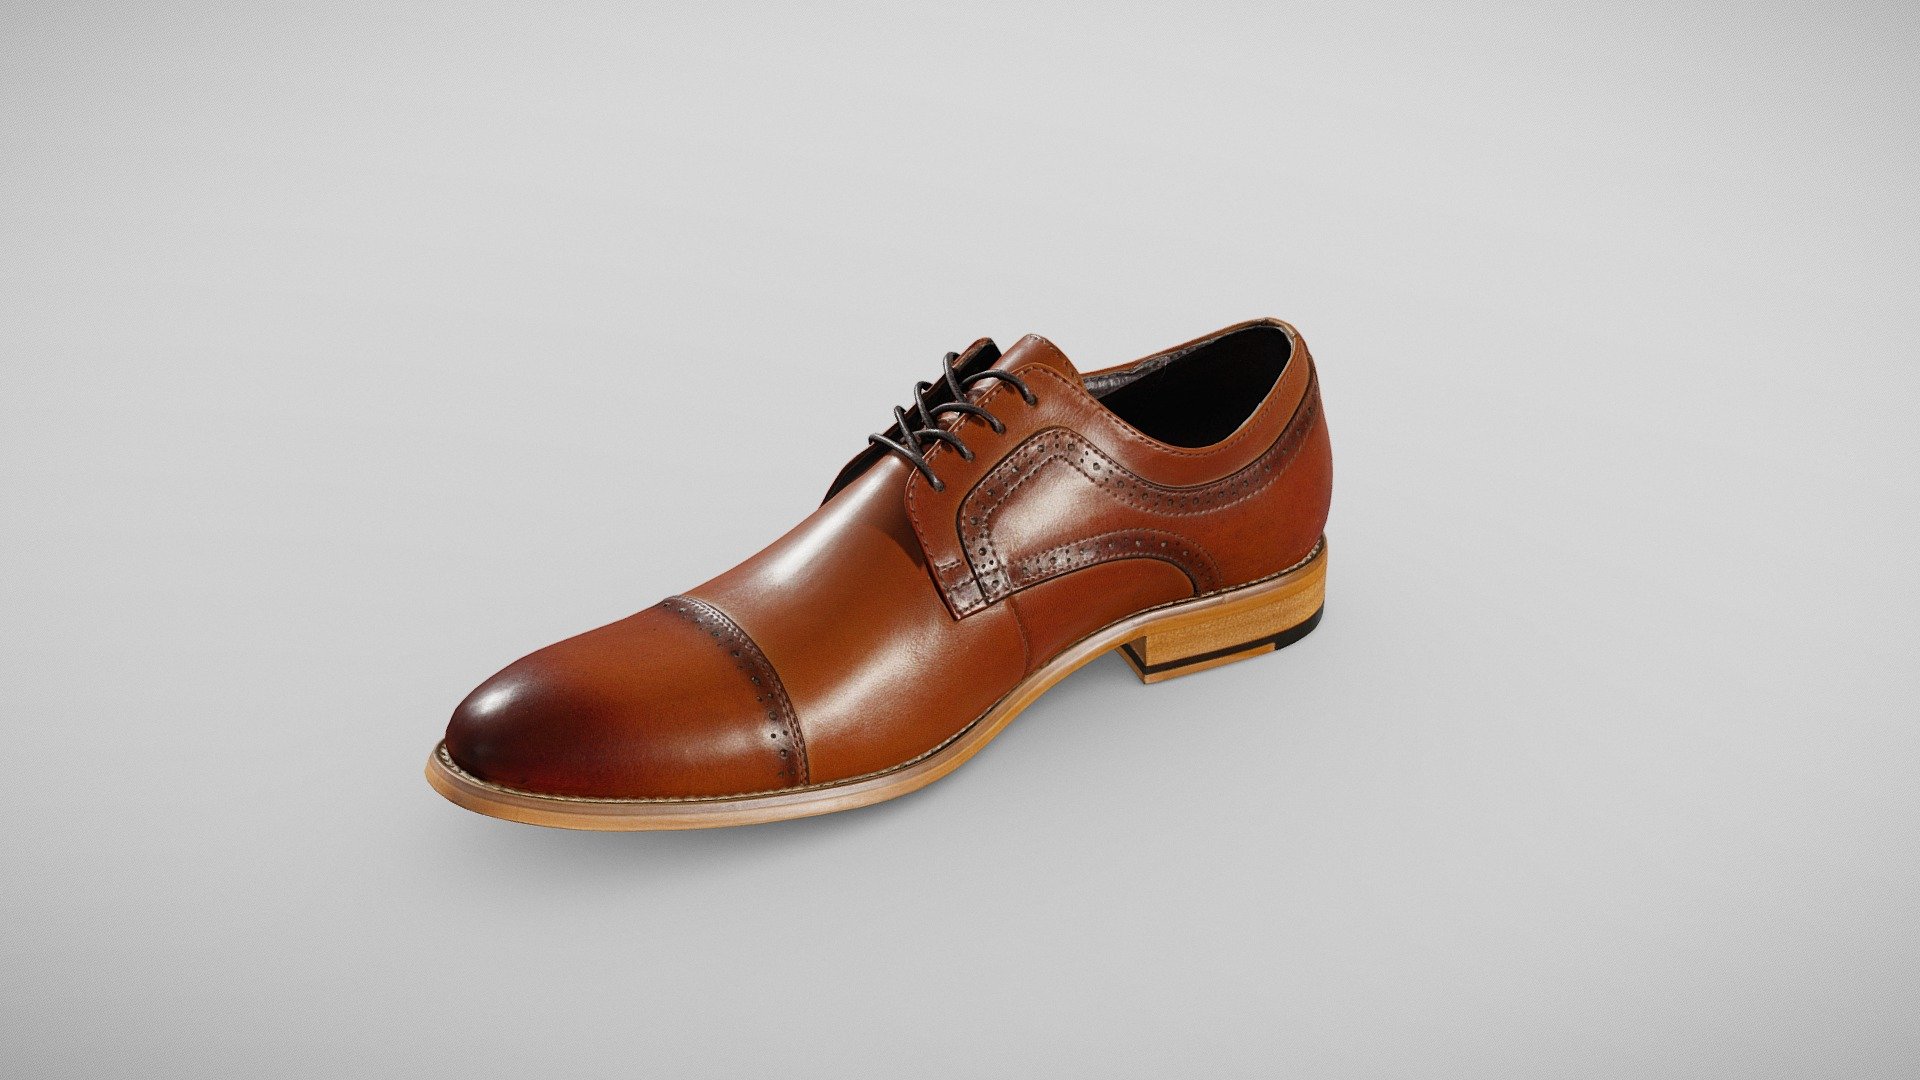 ** Stacy Adams Men's Dickinson Cap-Toe Lace-up Oxford **

The attention to detail is seen in the shadowing of the brogue edges as well as with the right amount of burnishing on the heel and toe. The quality and craftsmanship put into each pair is what sets Stacy Adams apart from other brands.

30.9 x 11.0 x 11.1 cm (109 micrometers per texel @ 4k)

Scanned using advanced technology developed by inciprocal Inc. that enables highly photo-realistic reproduction of real-world products in virtual environments. Our hardware and software technology combines advanced photometry, structured light, photogrammtery and light fields to capture and generate accurate material representations from tens of thousands of images targeting real-time and offline path-traced PBR compatible renderers.

Zip file includes low-poly OBJ mesh (in meters) with a set of 4k PBR textures compressed with lossless JPEG (no chroma sub-sampling) 3d model